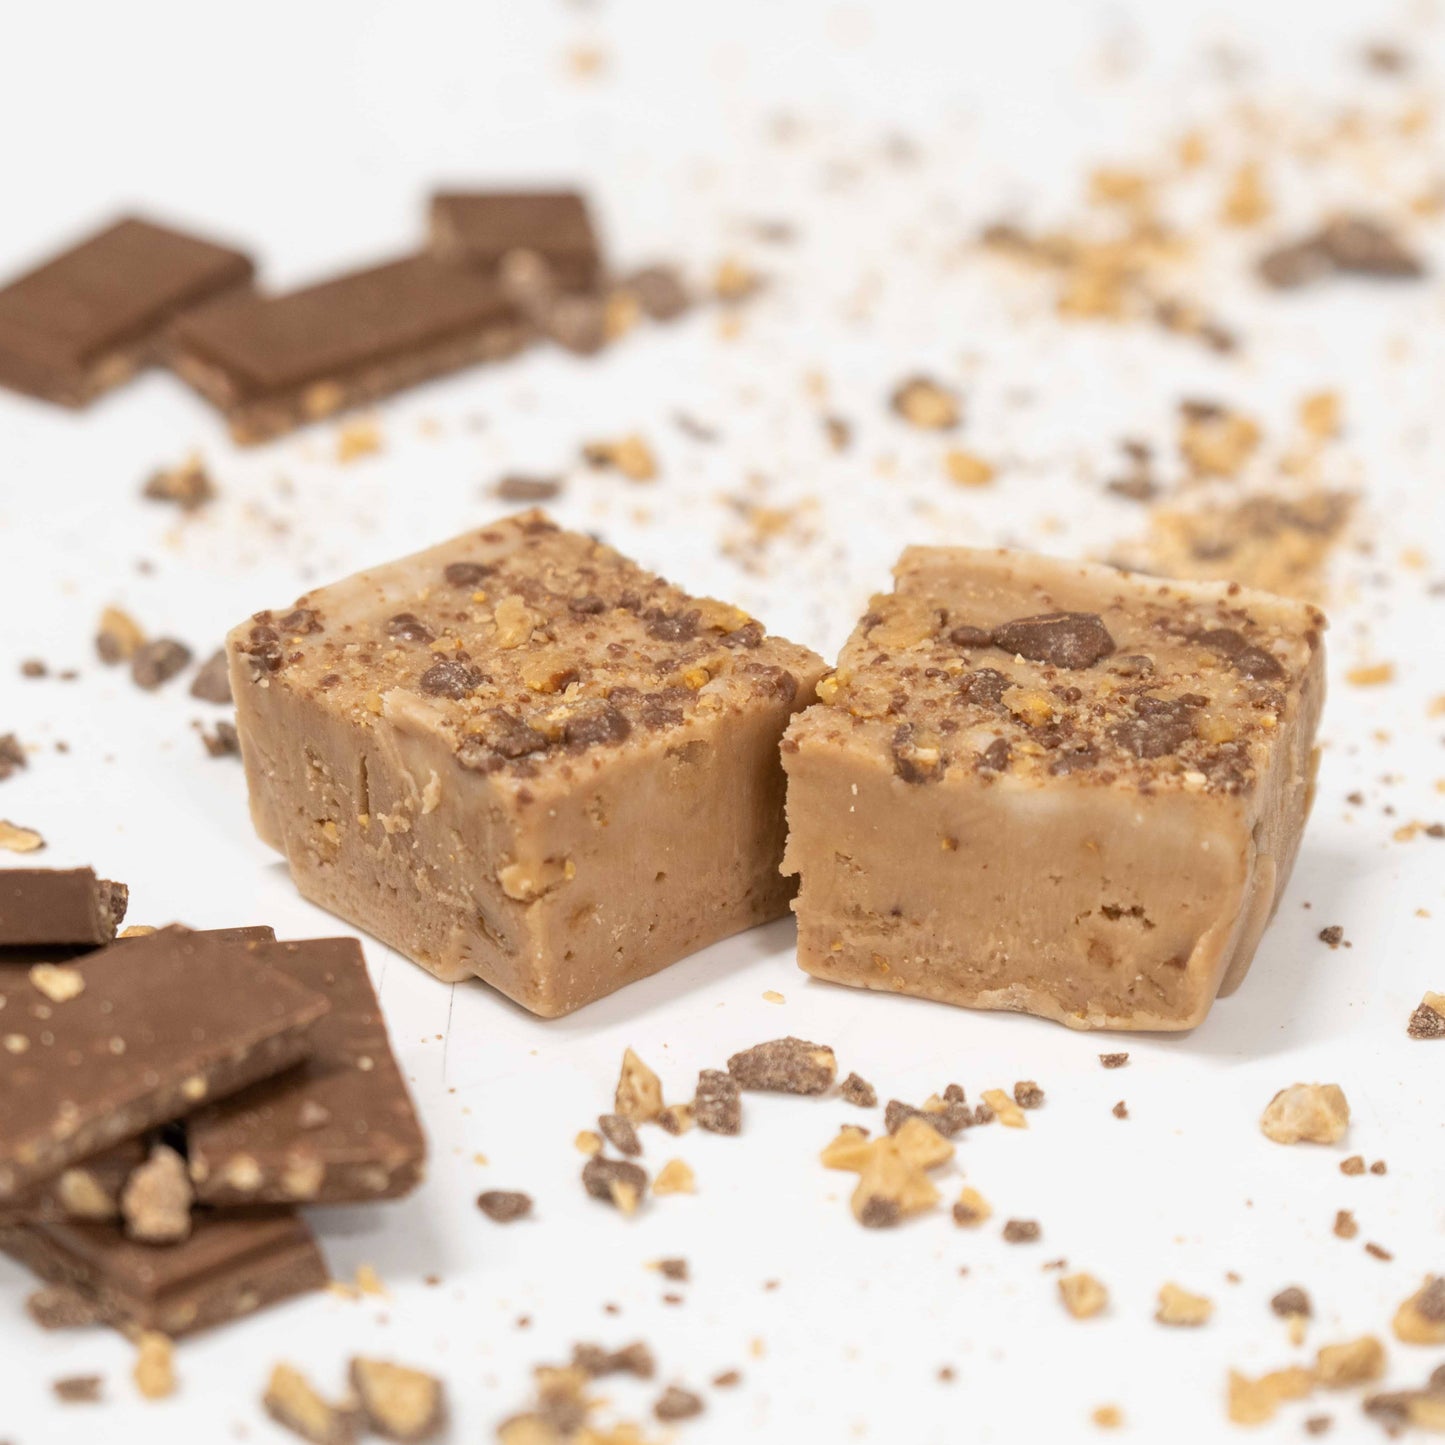 Valley Fudge & Candy - English Toffee Crunch Fudge (1/2 lb Package)